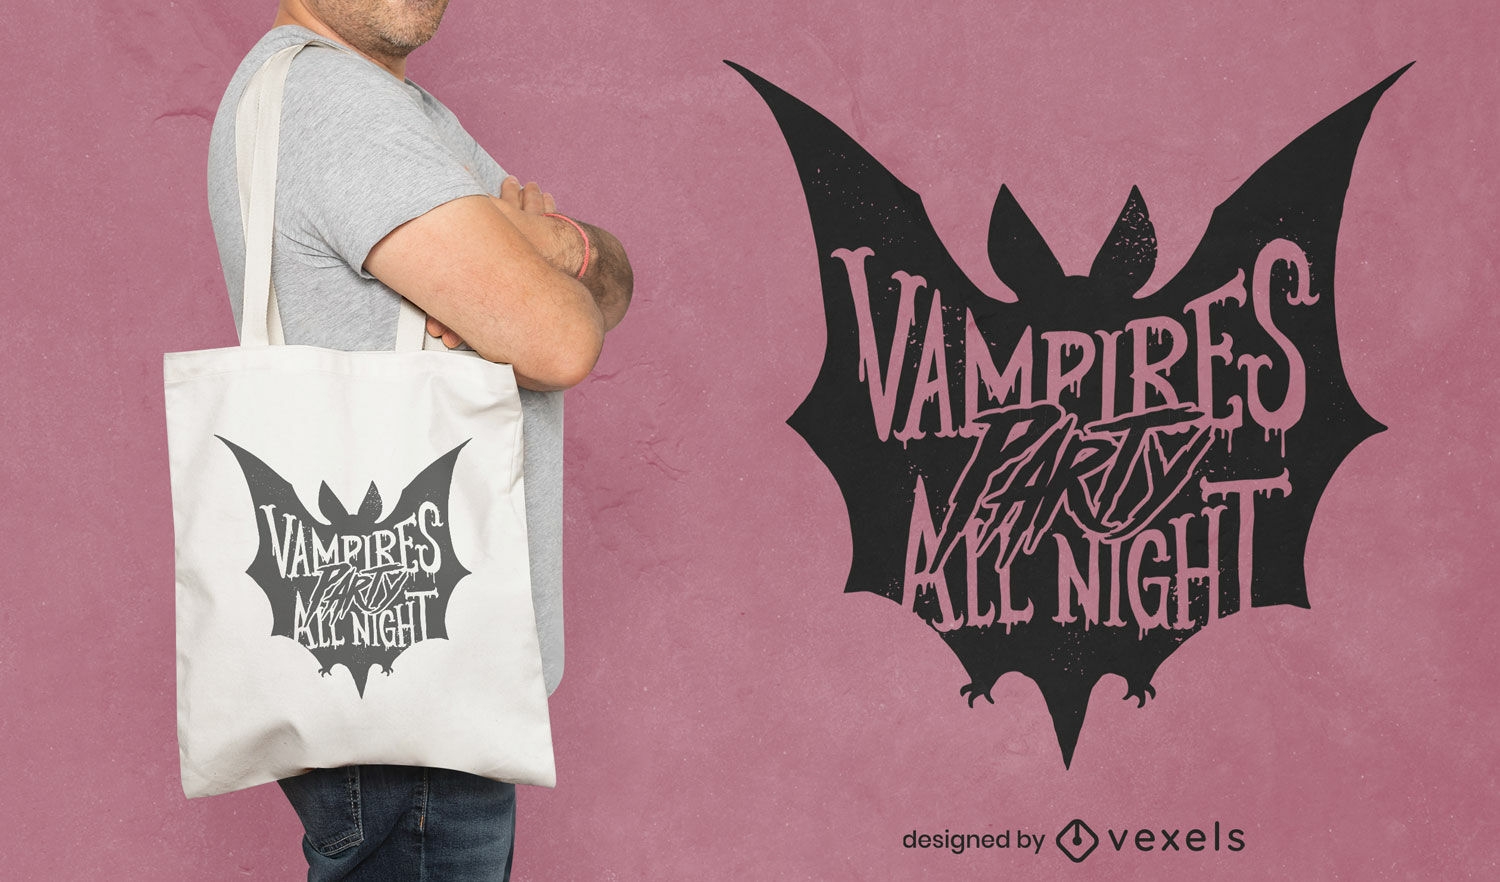 Vampires party all night Halloween tote bag design